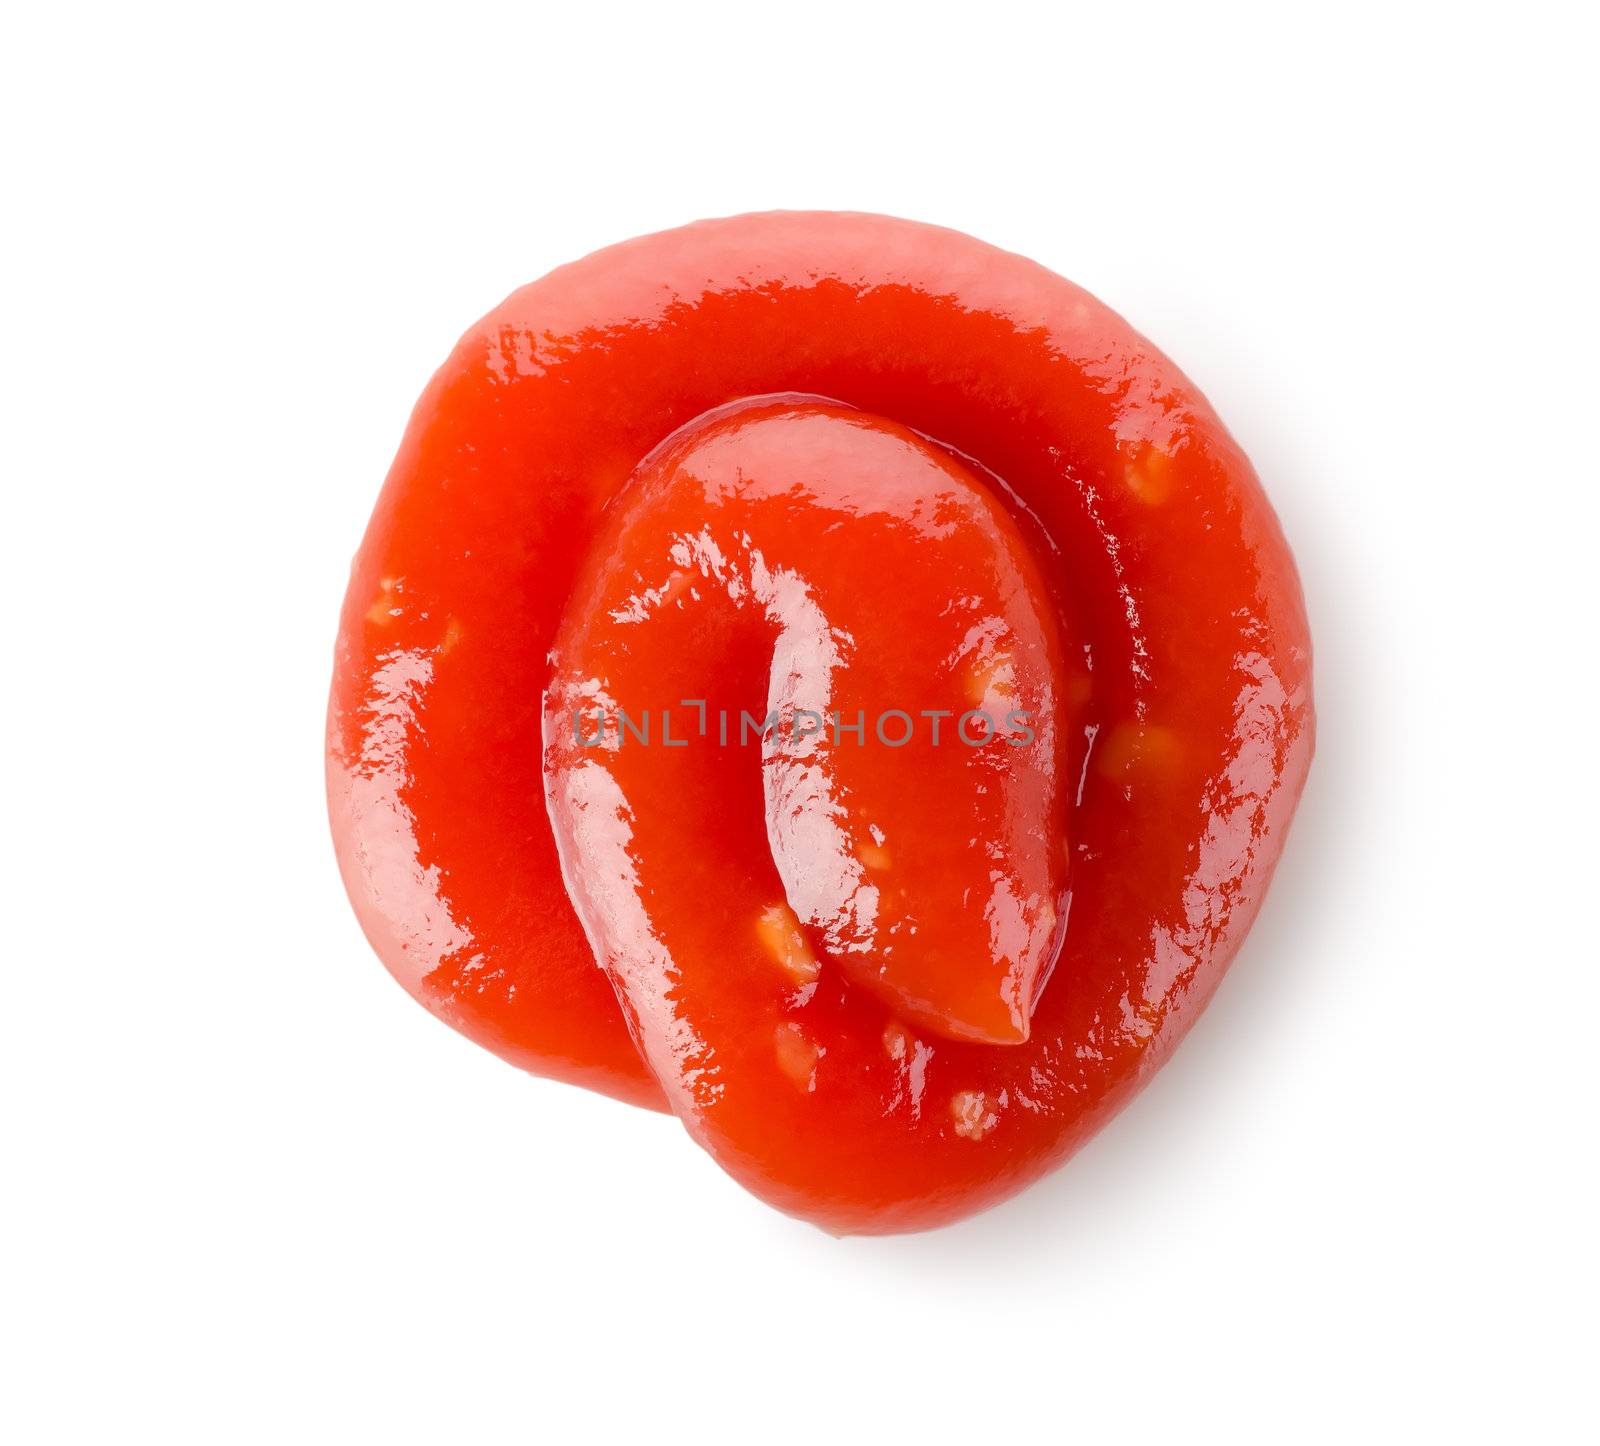 Tomato ketchup sauce isolated on a white background.